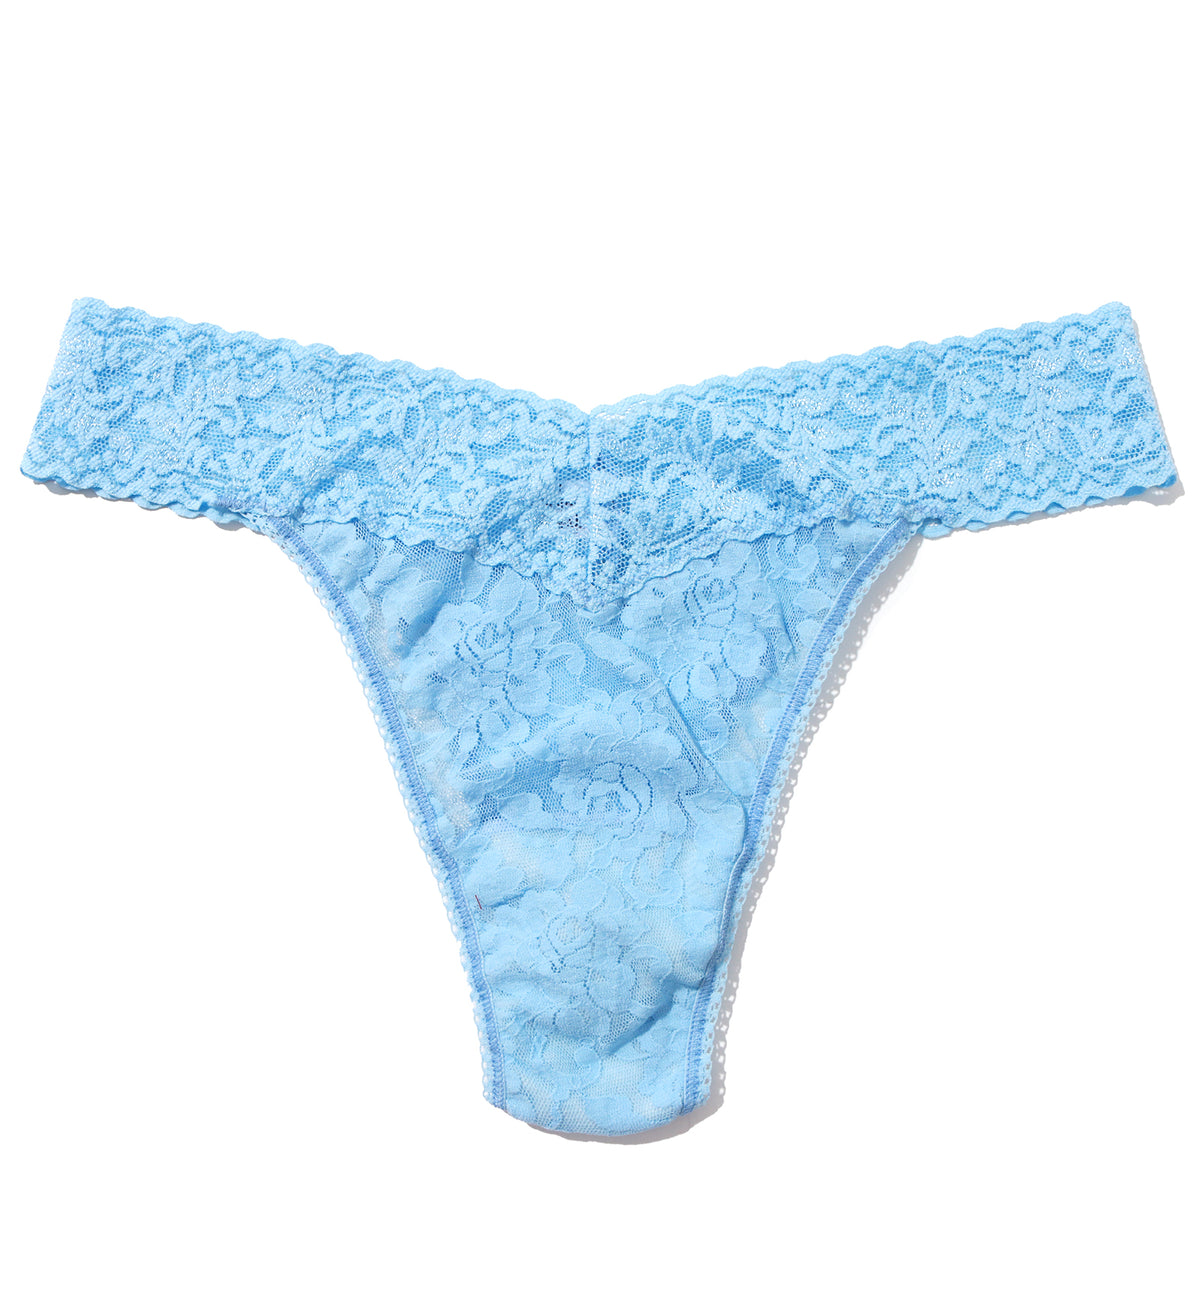 Hanky Panky Signature Lace Original Rise Thong (4811P),Partly Cloudy - Partly Cloudy,One Size